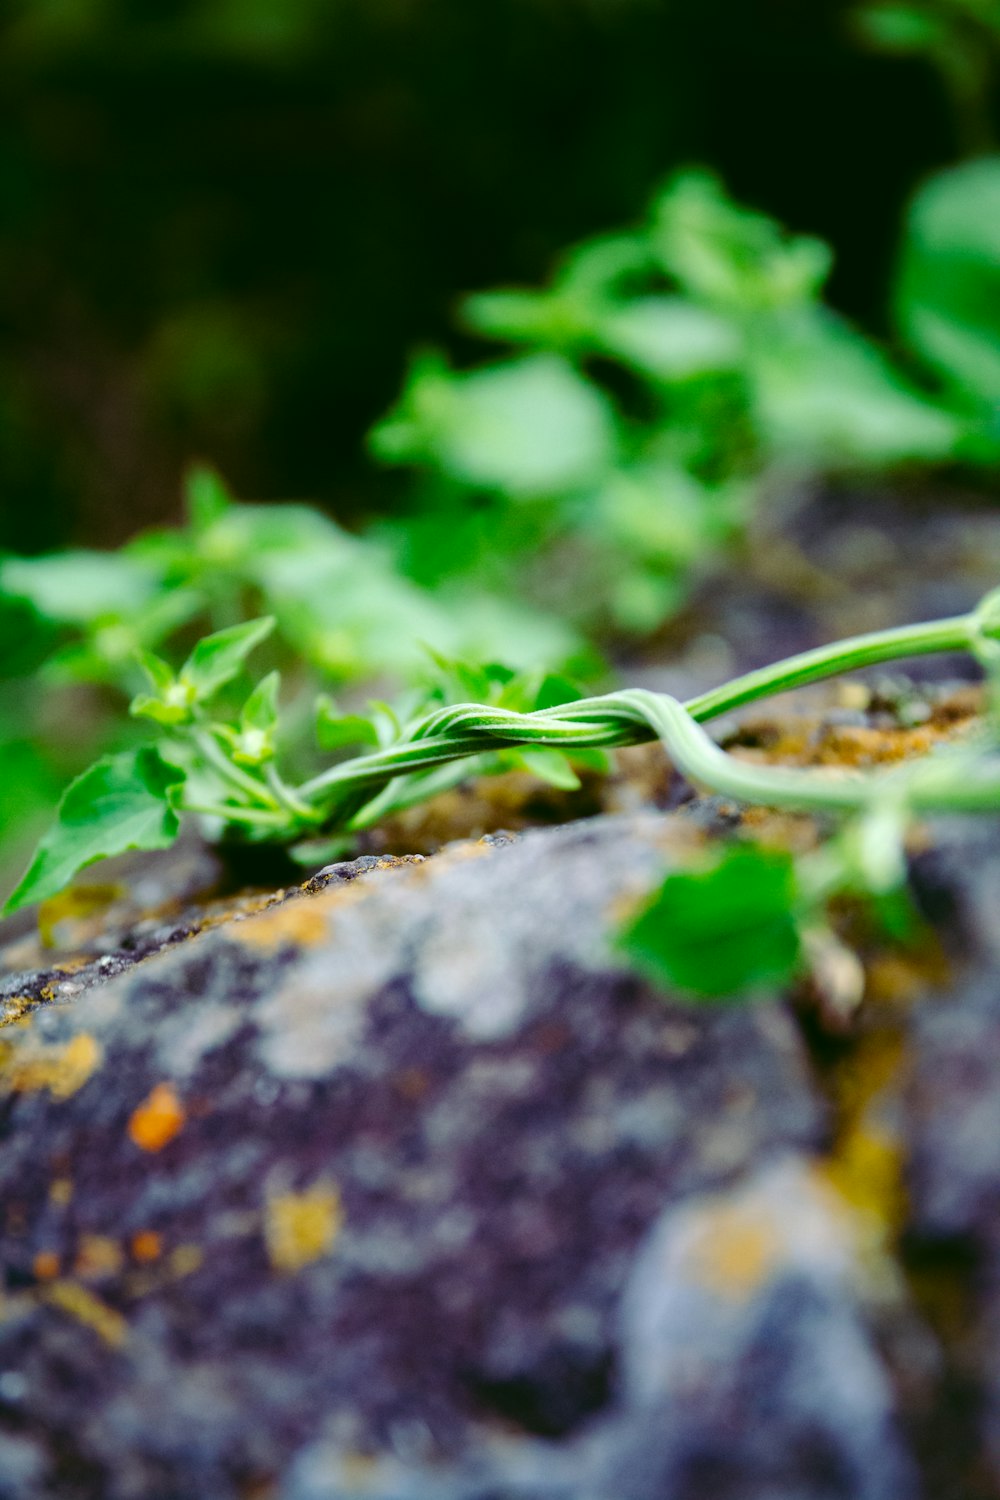 a close up of a plant growing on a rock